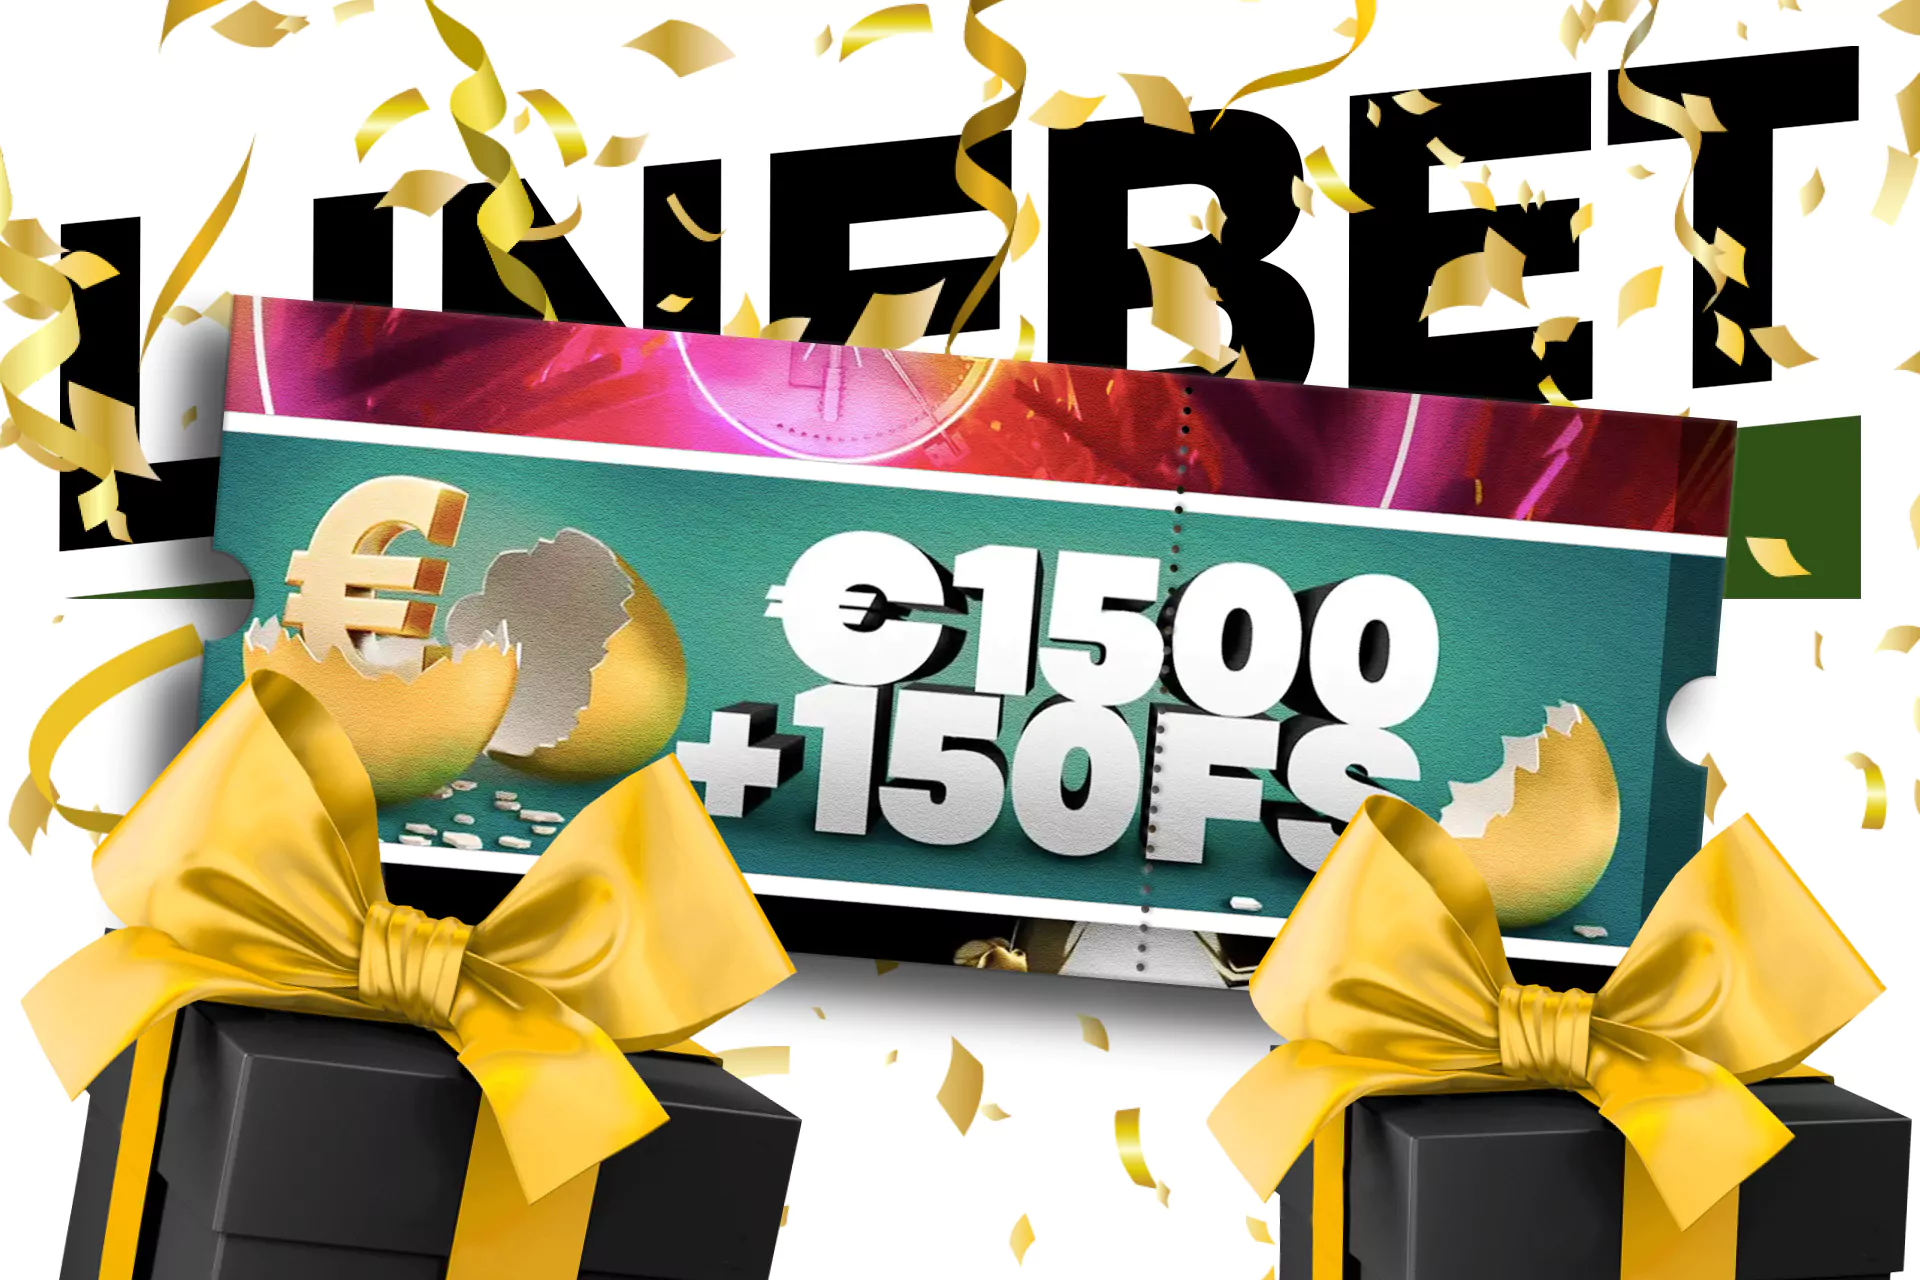 Place tennis bets and get special bonuses from Linebet.